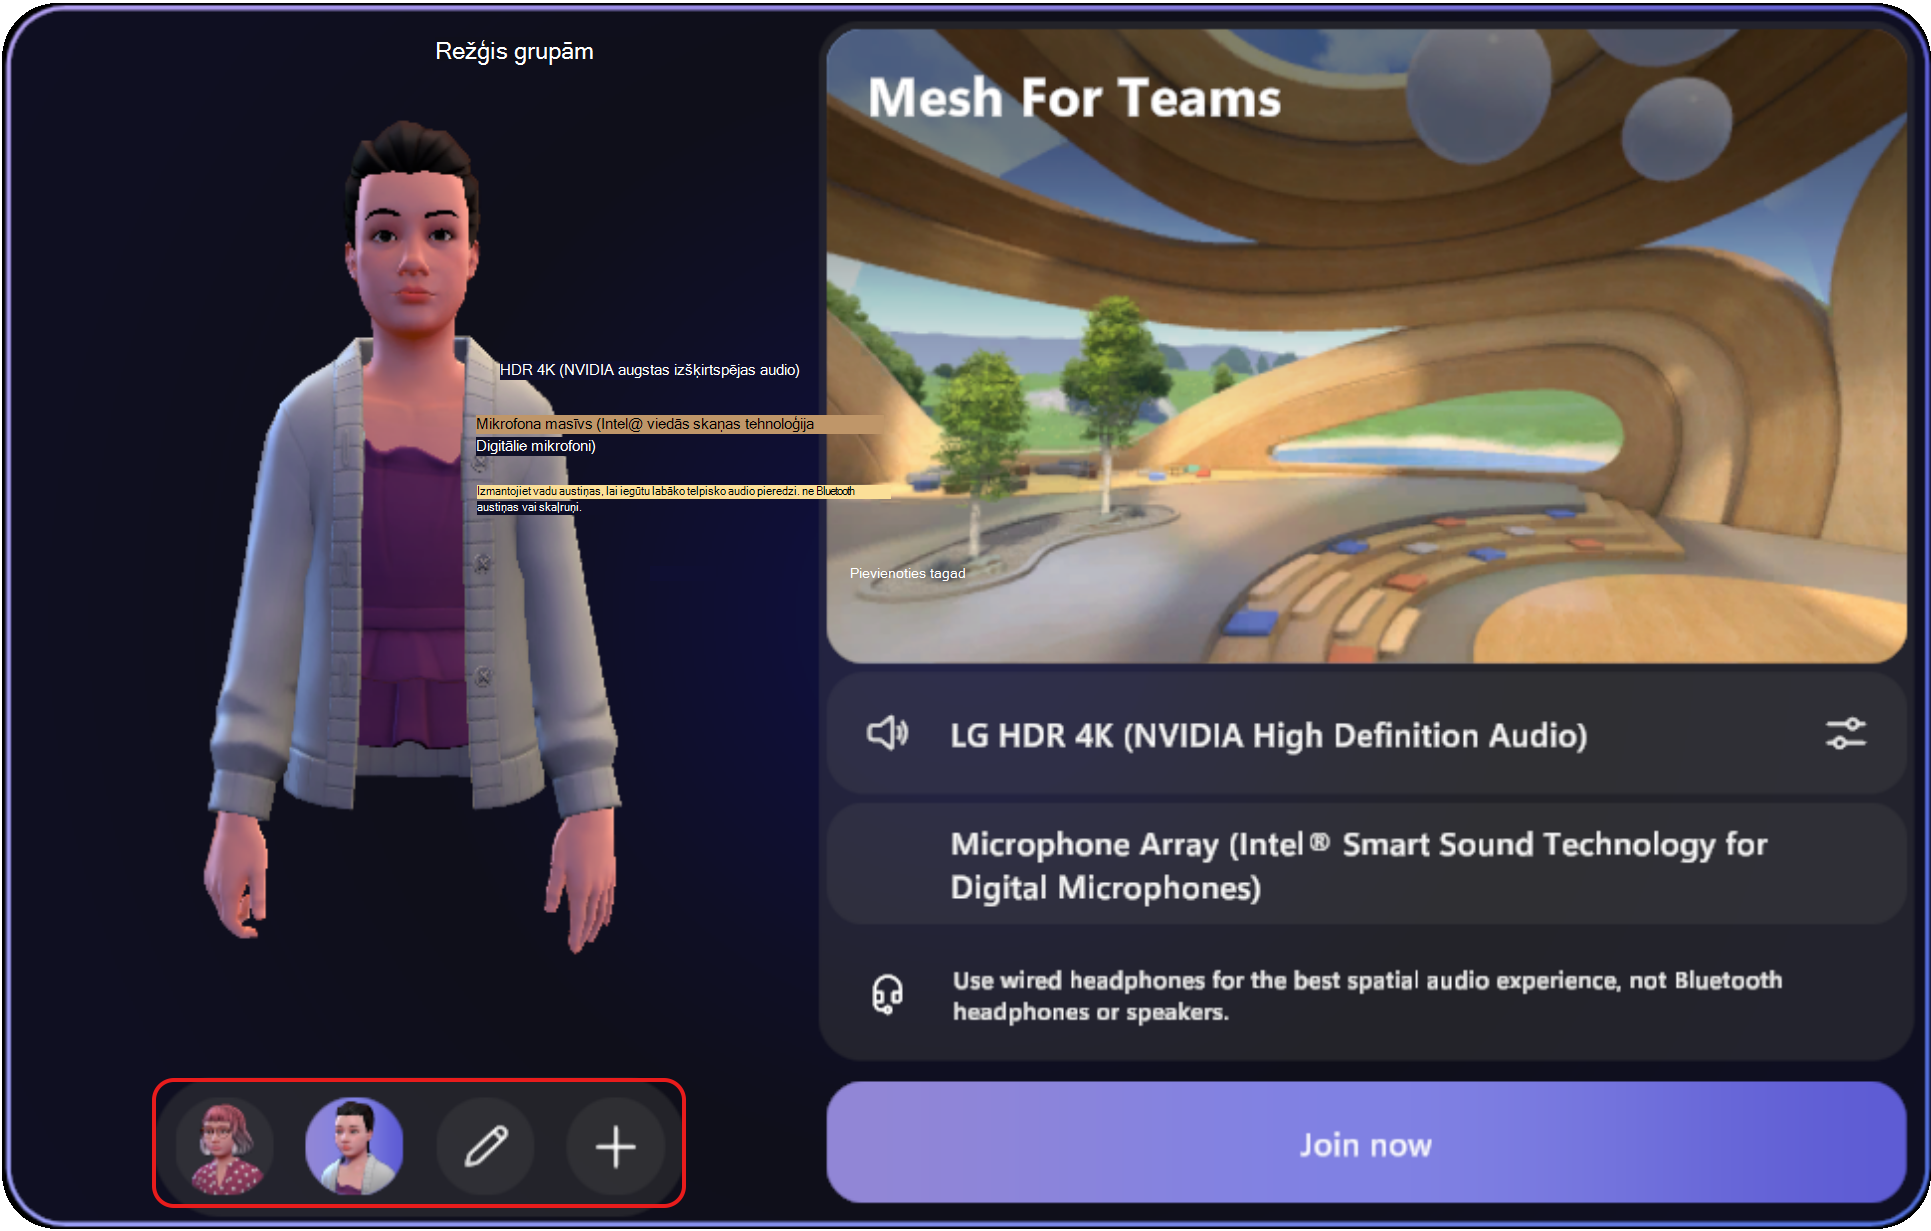 options for creating or customizing your avatars on the pre-join screen for immersive spaces.